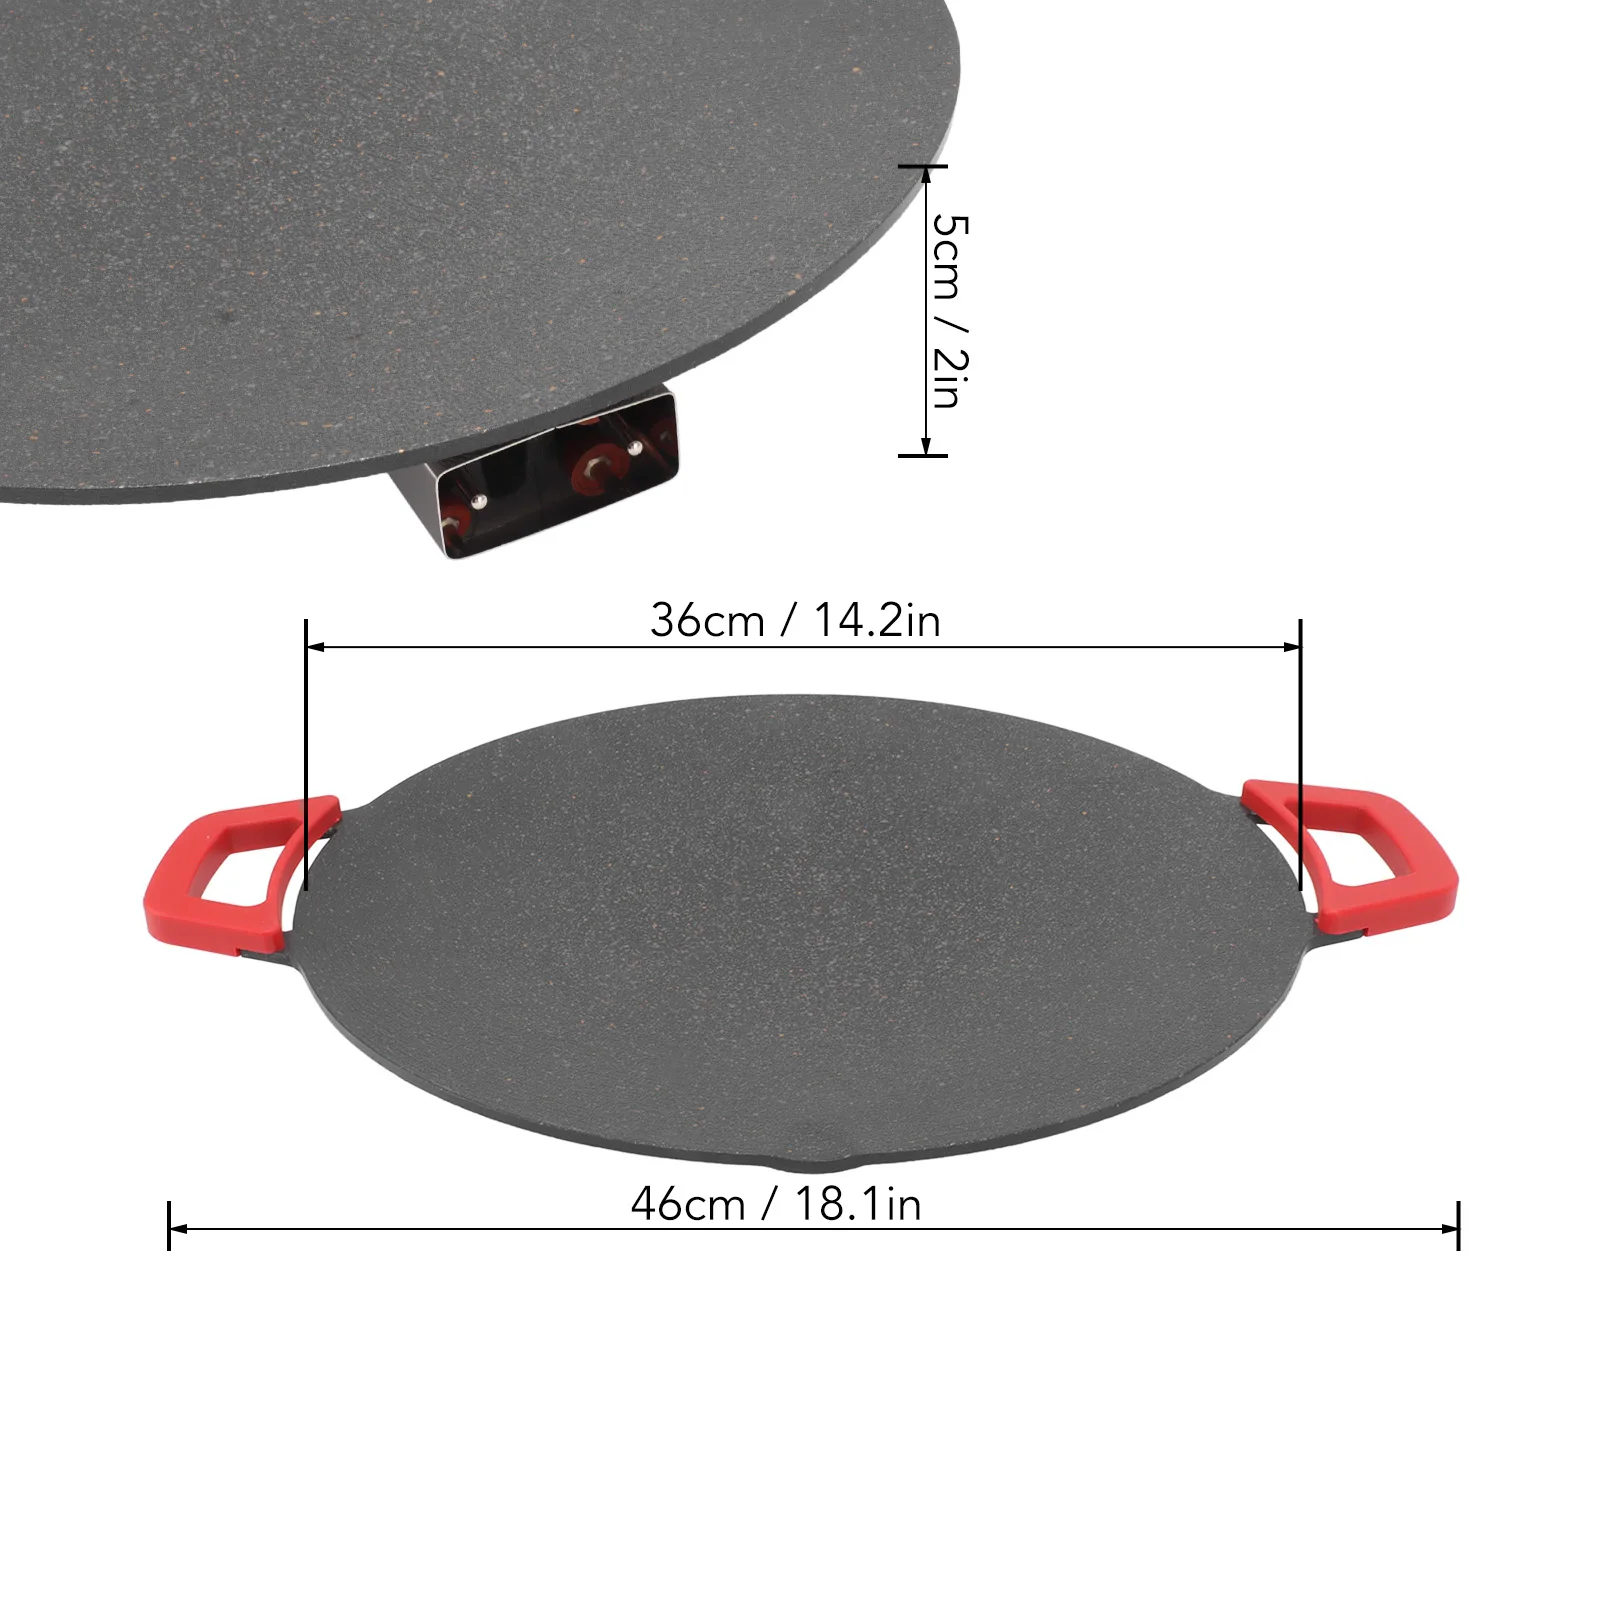 Korean Grill Pan Electric Round Comal BBQ Griddle Plate with Non Stick Coating AU Plug 220V Black